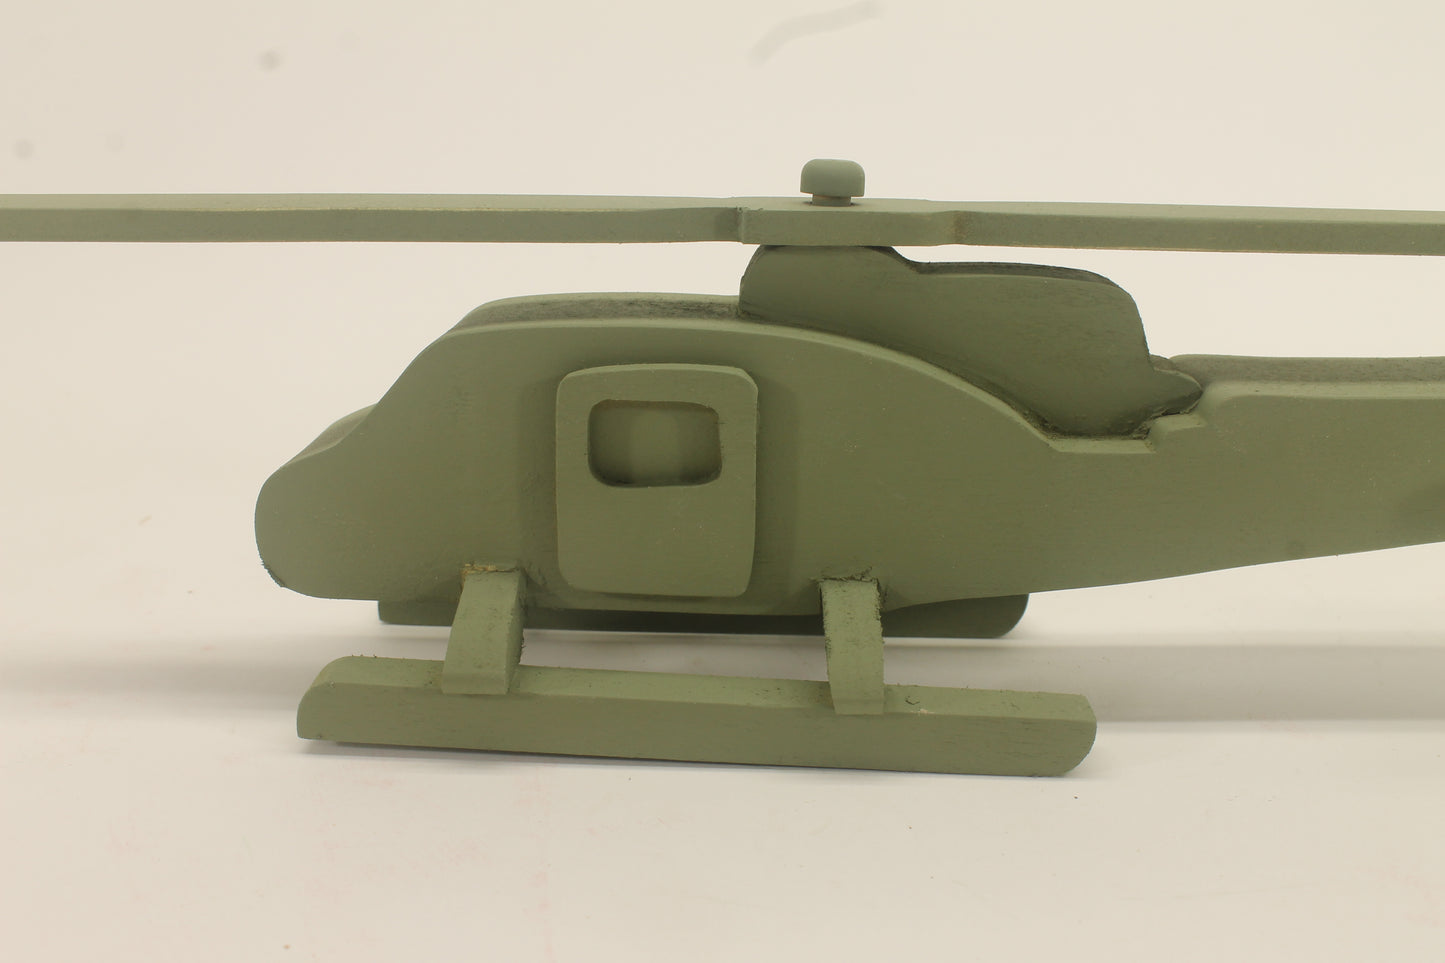 Wooden toy helicopter model